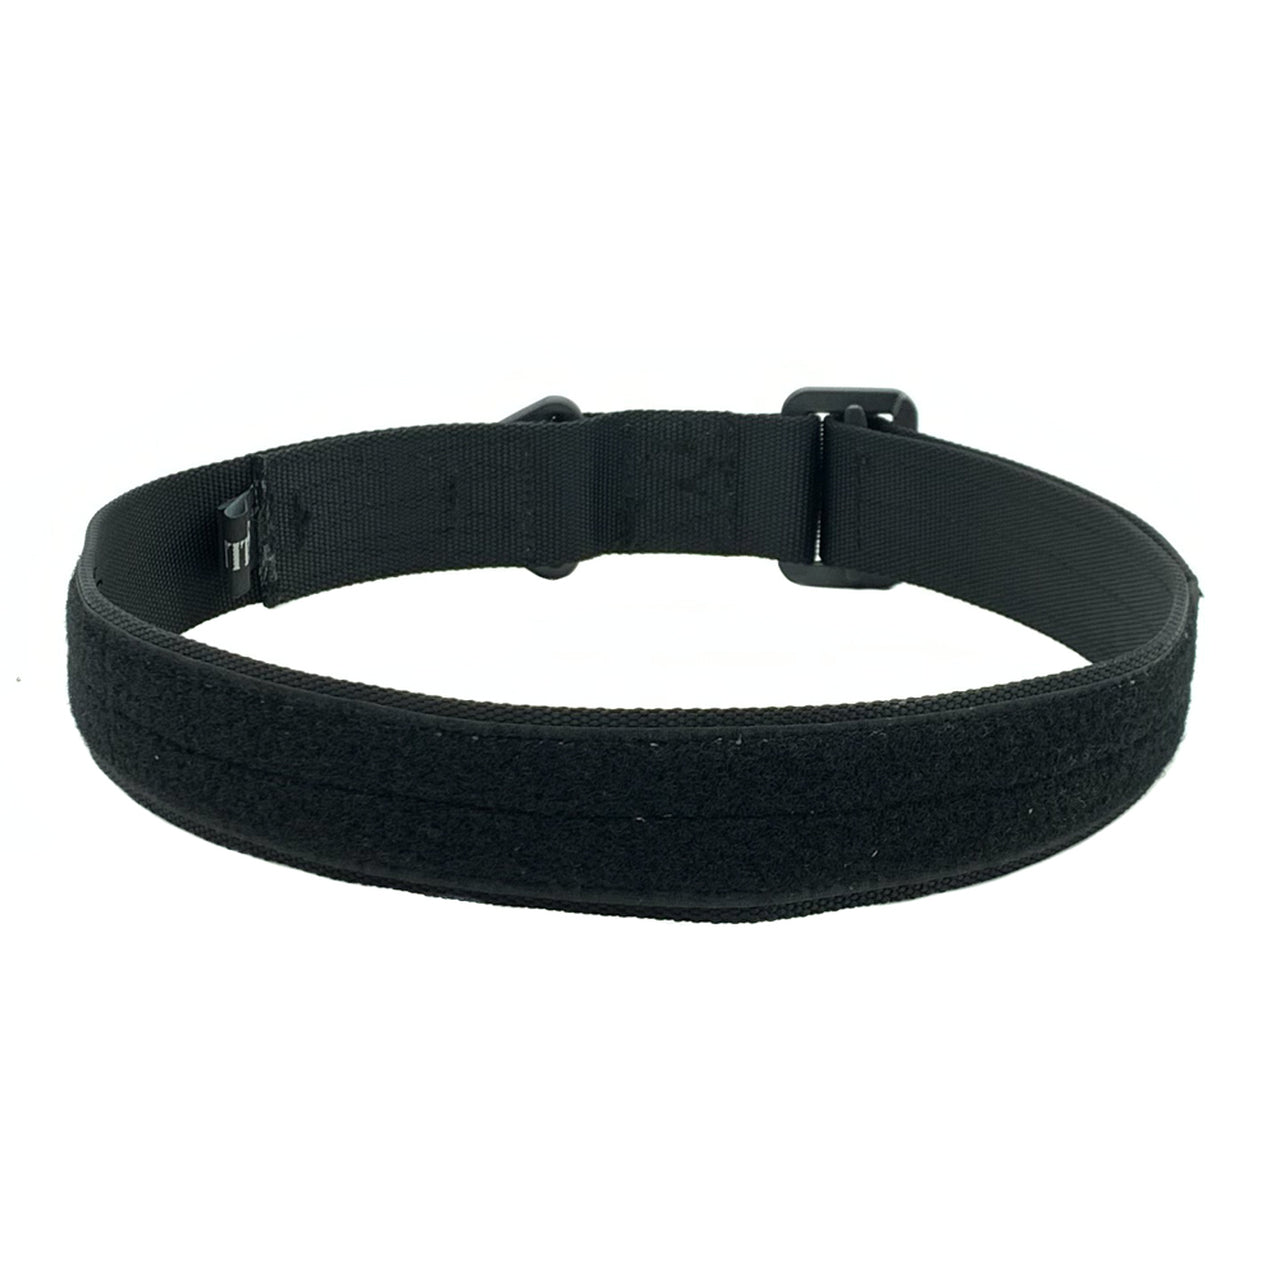 A Shellback Tactical Riggers Belt on a white background.